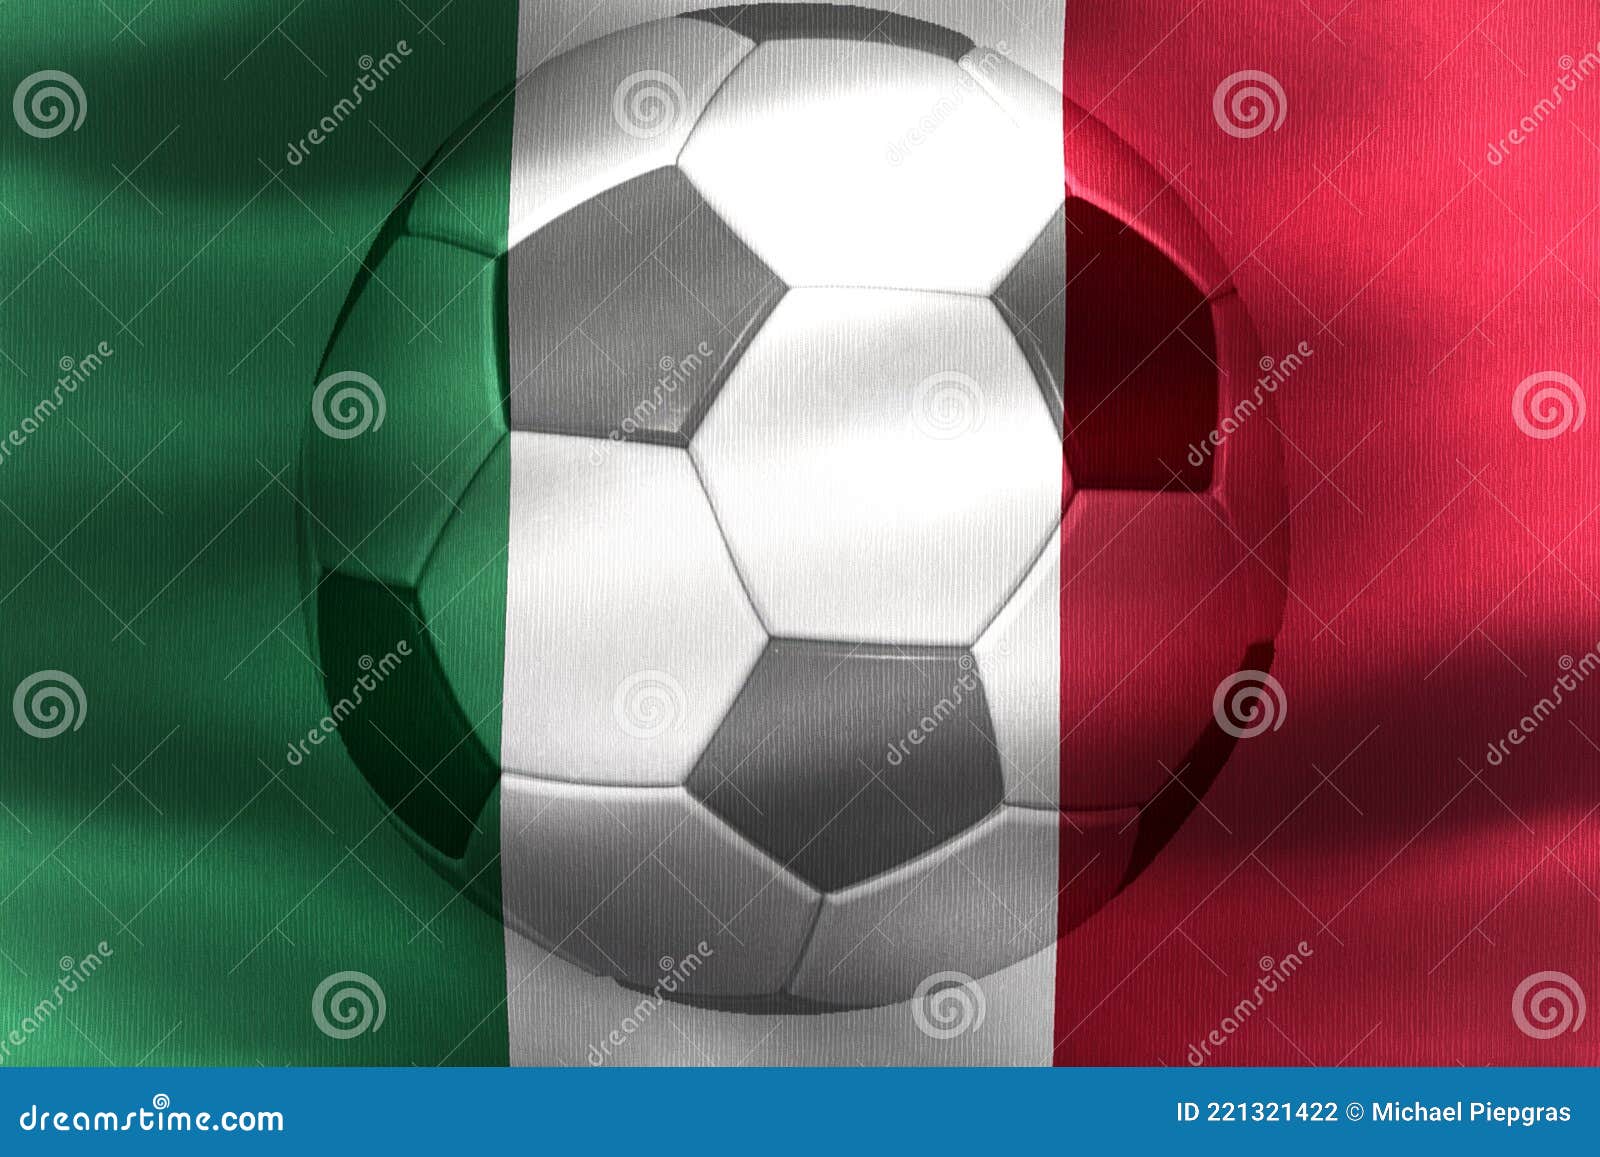 World Cup Soccer ITALIA Italy FLAG ALL WEATHER Soccer Ball Official Size 5 